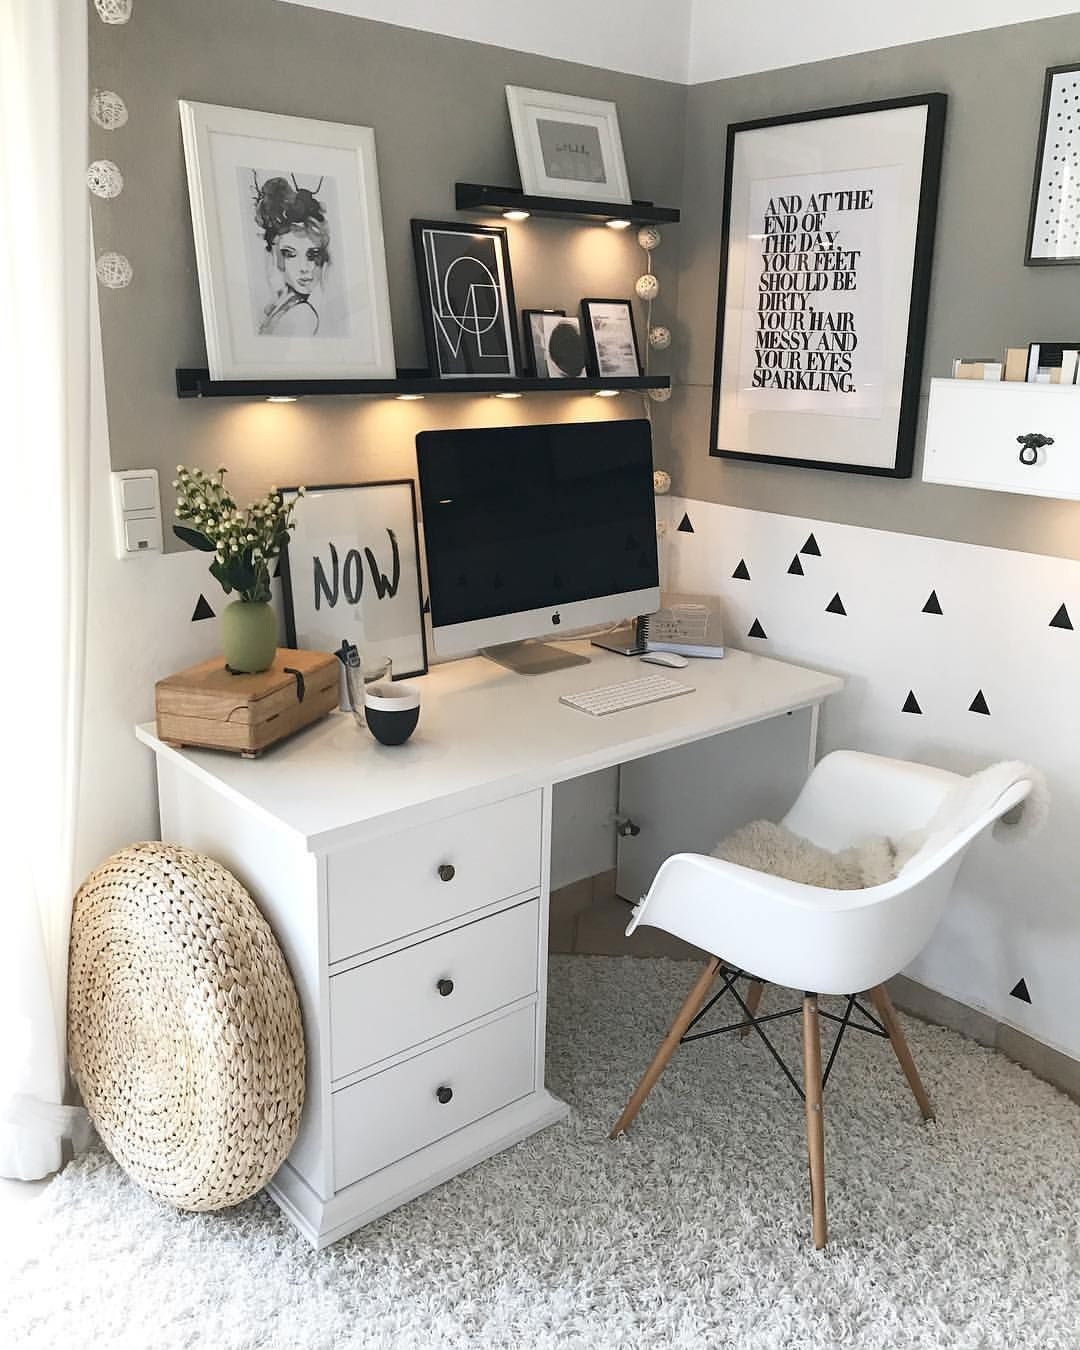 Small Bedroom Desk Ideas
 Pin by Hasel on Inspiration in 2019